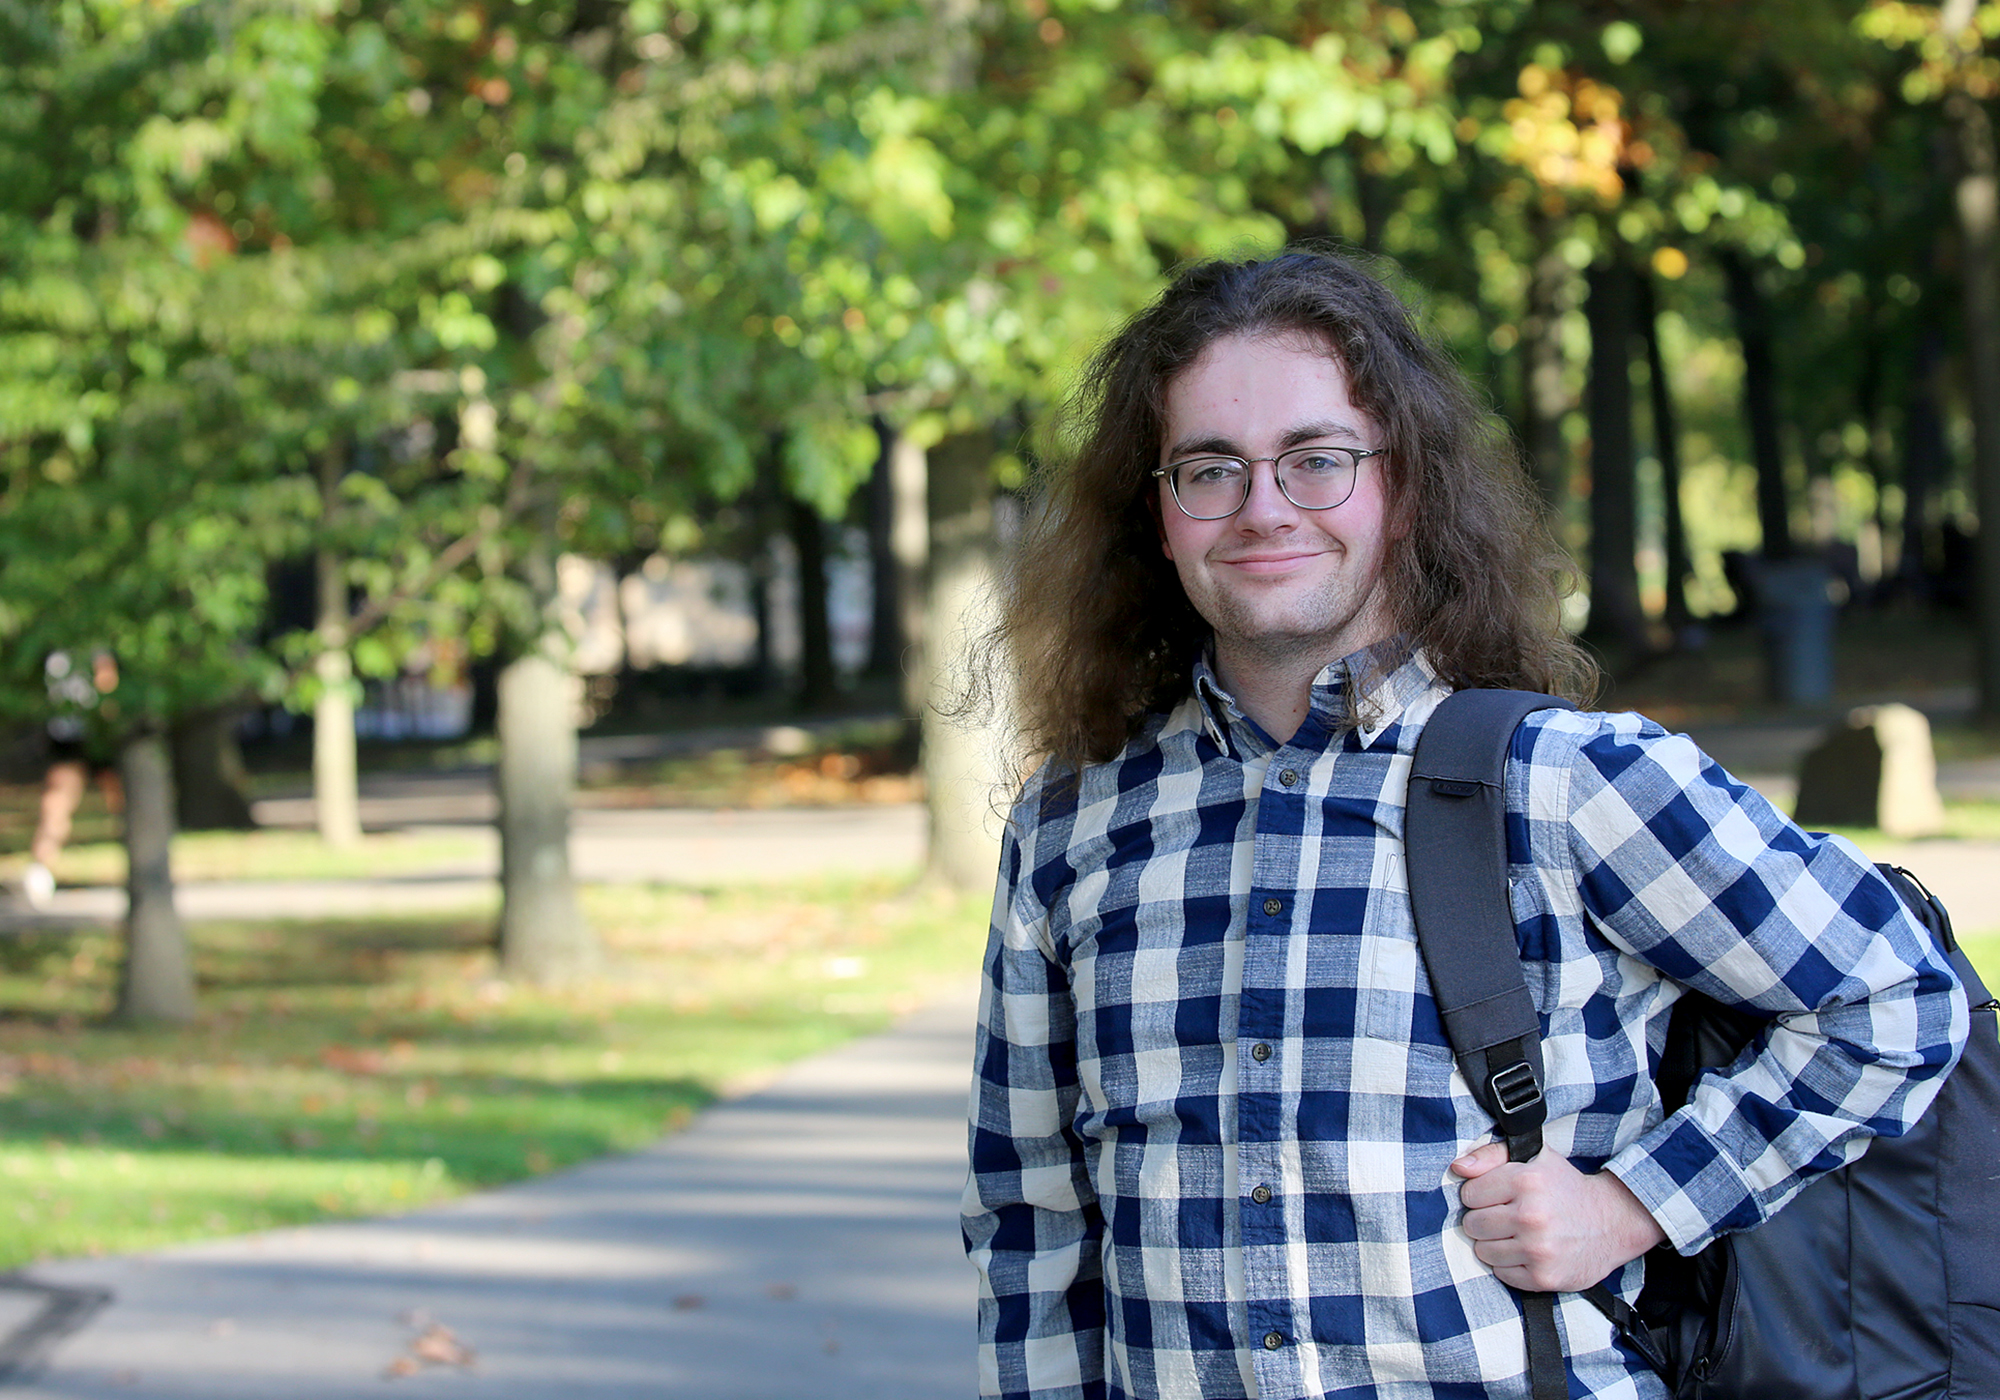 portrait of a man with long hair and glasses with a plaid shirt and backpack standing outside a path lined with oak trees